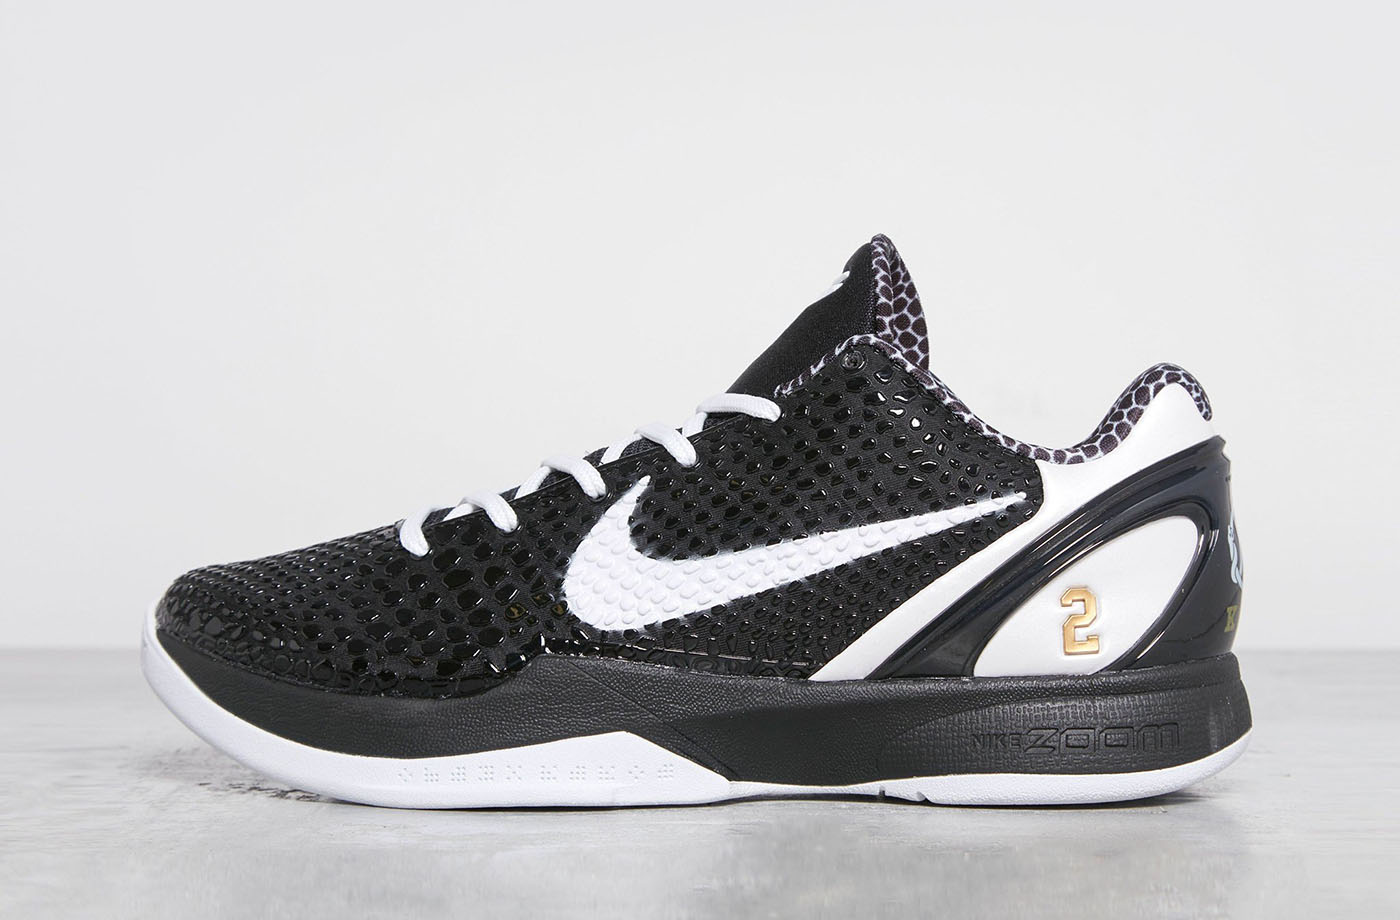 Kobe Bryant Sneaker Designed by Vanessa Bryant to Be Released by Nike